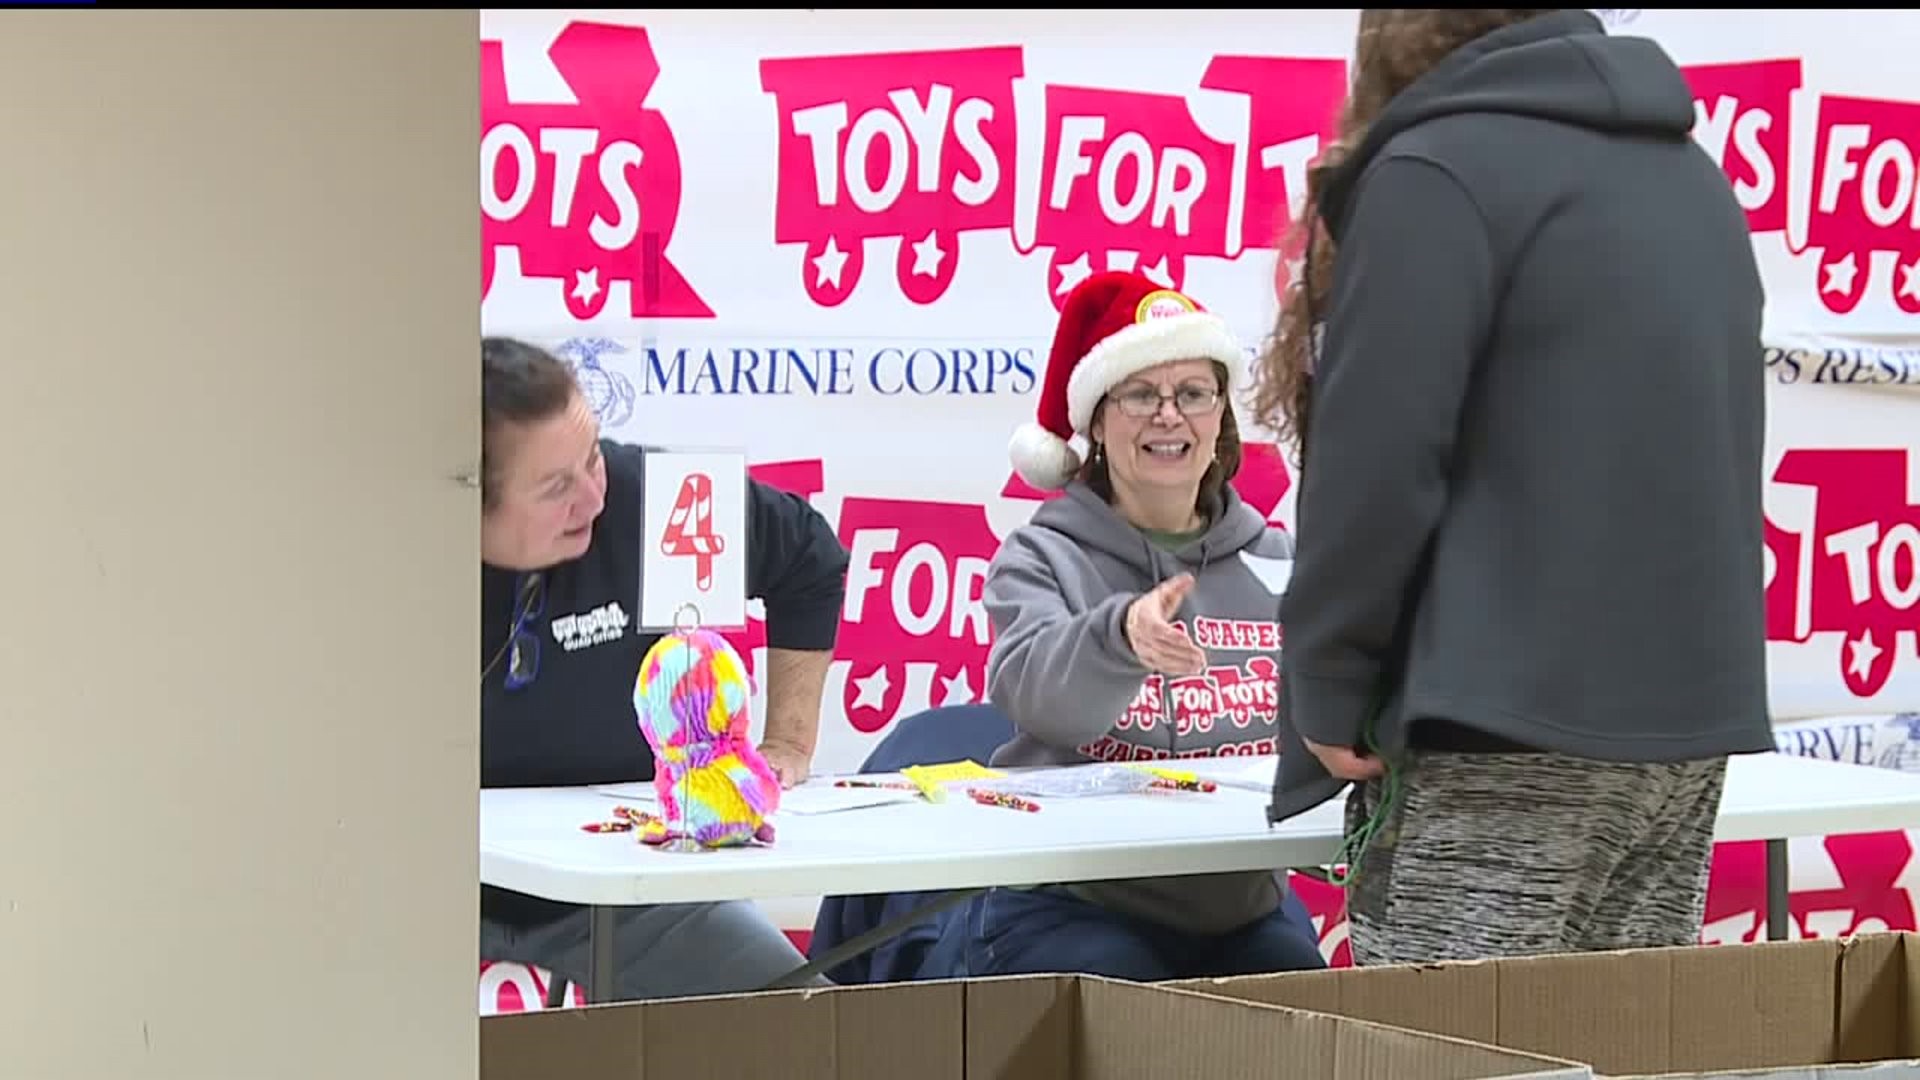 Toys for Tots distribution day is here!